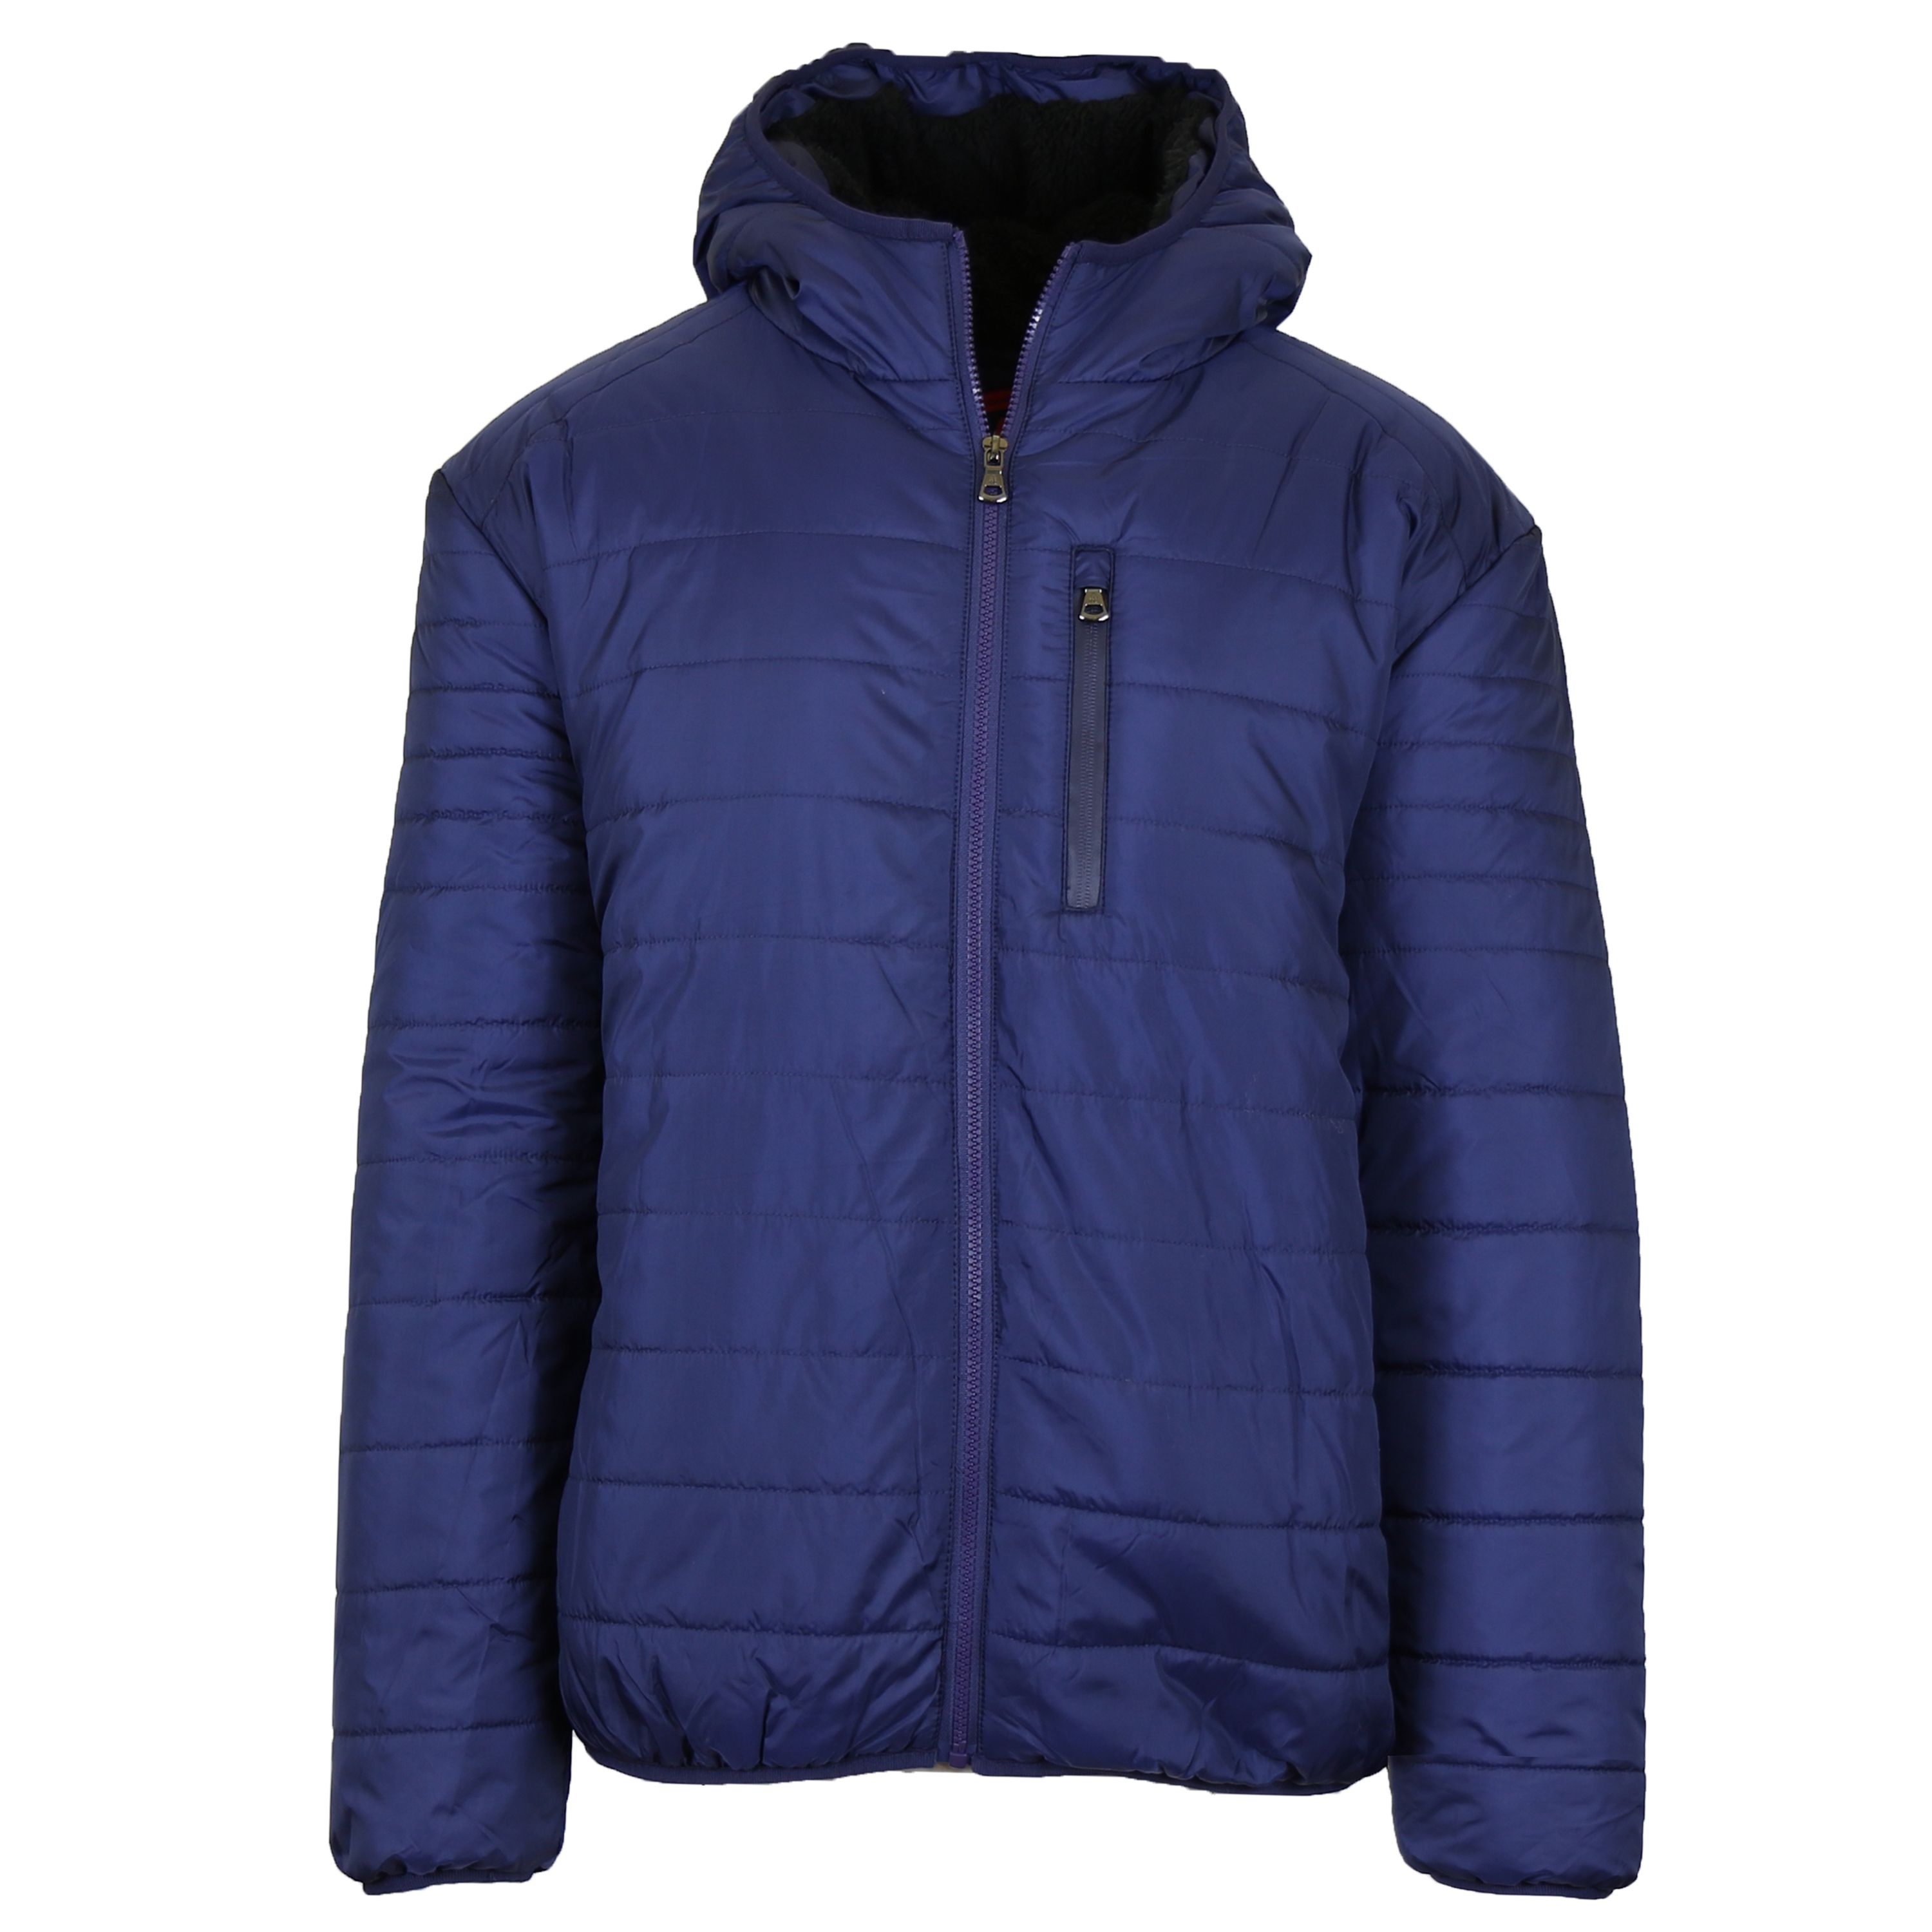 Hooded puffer jacket - navy